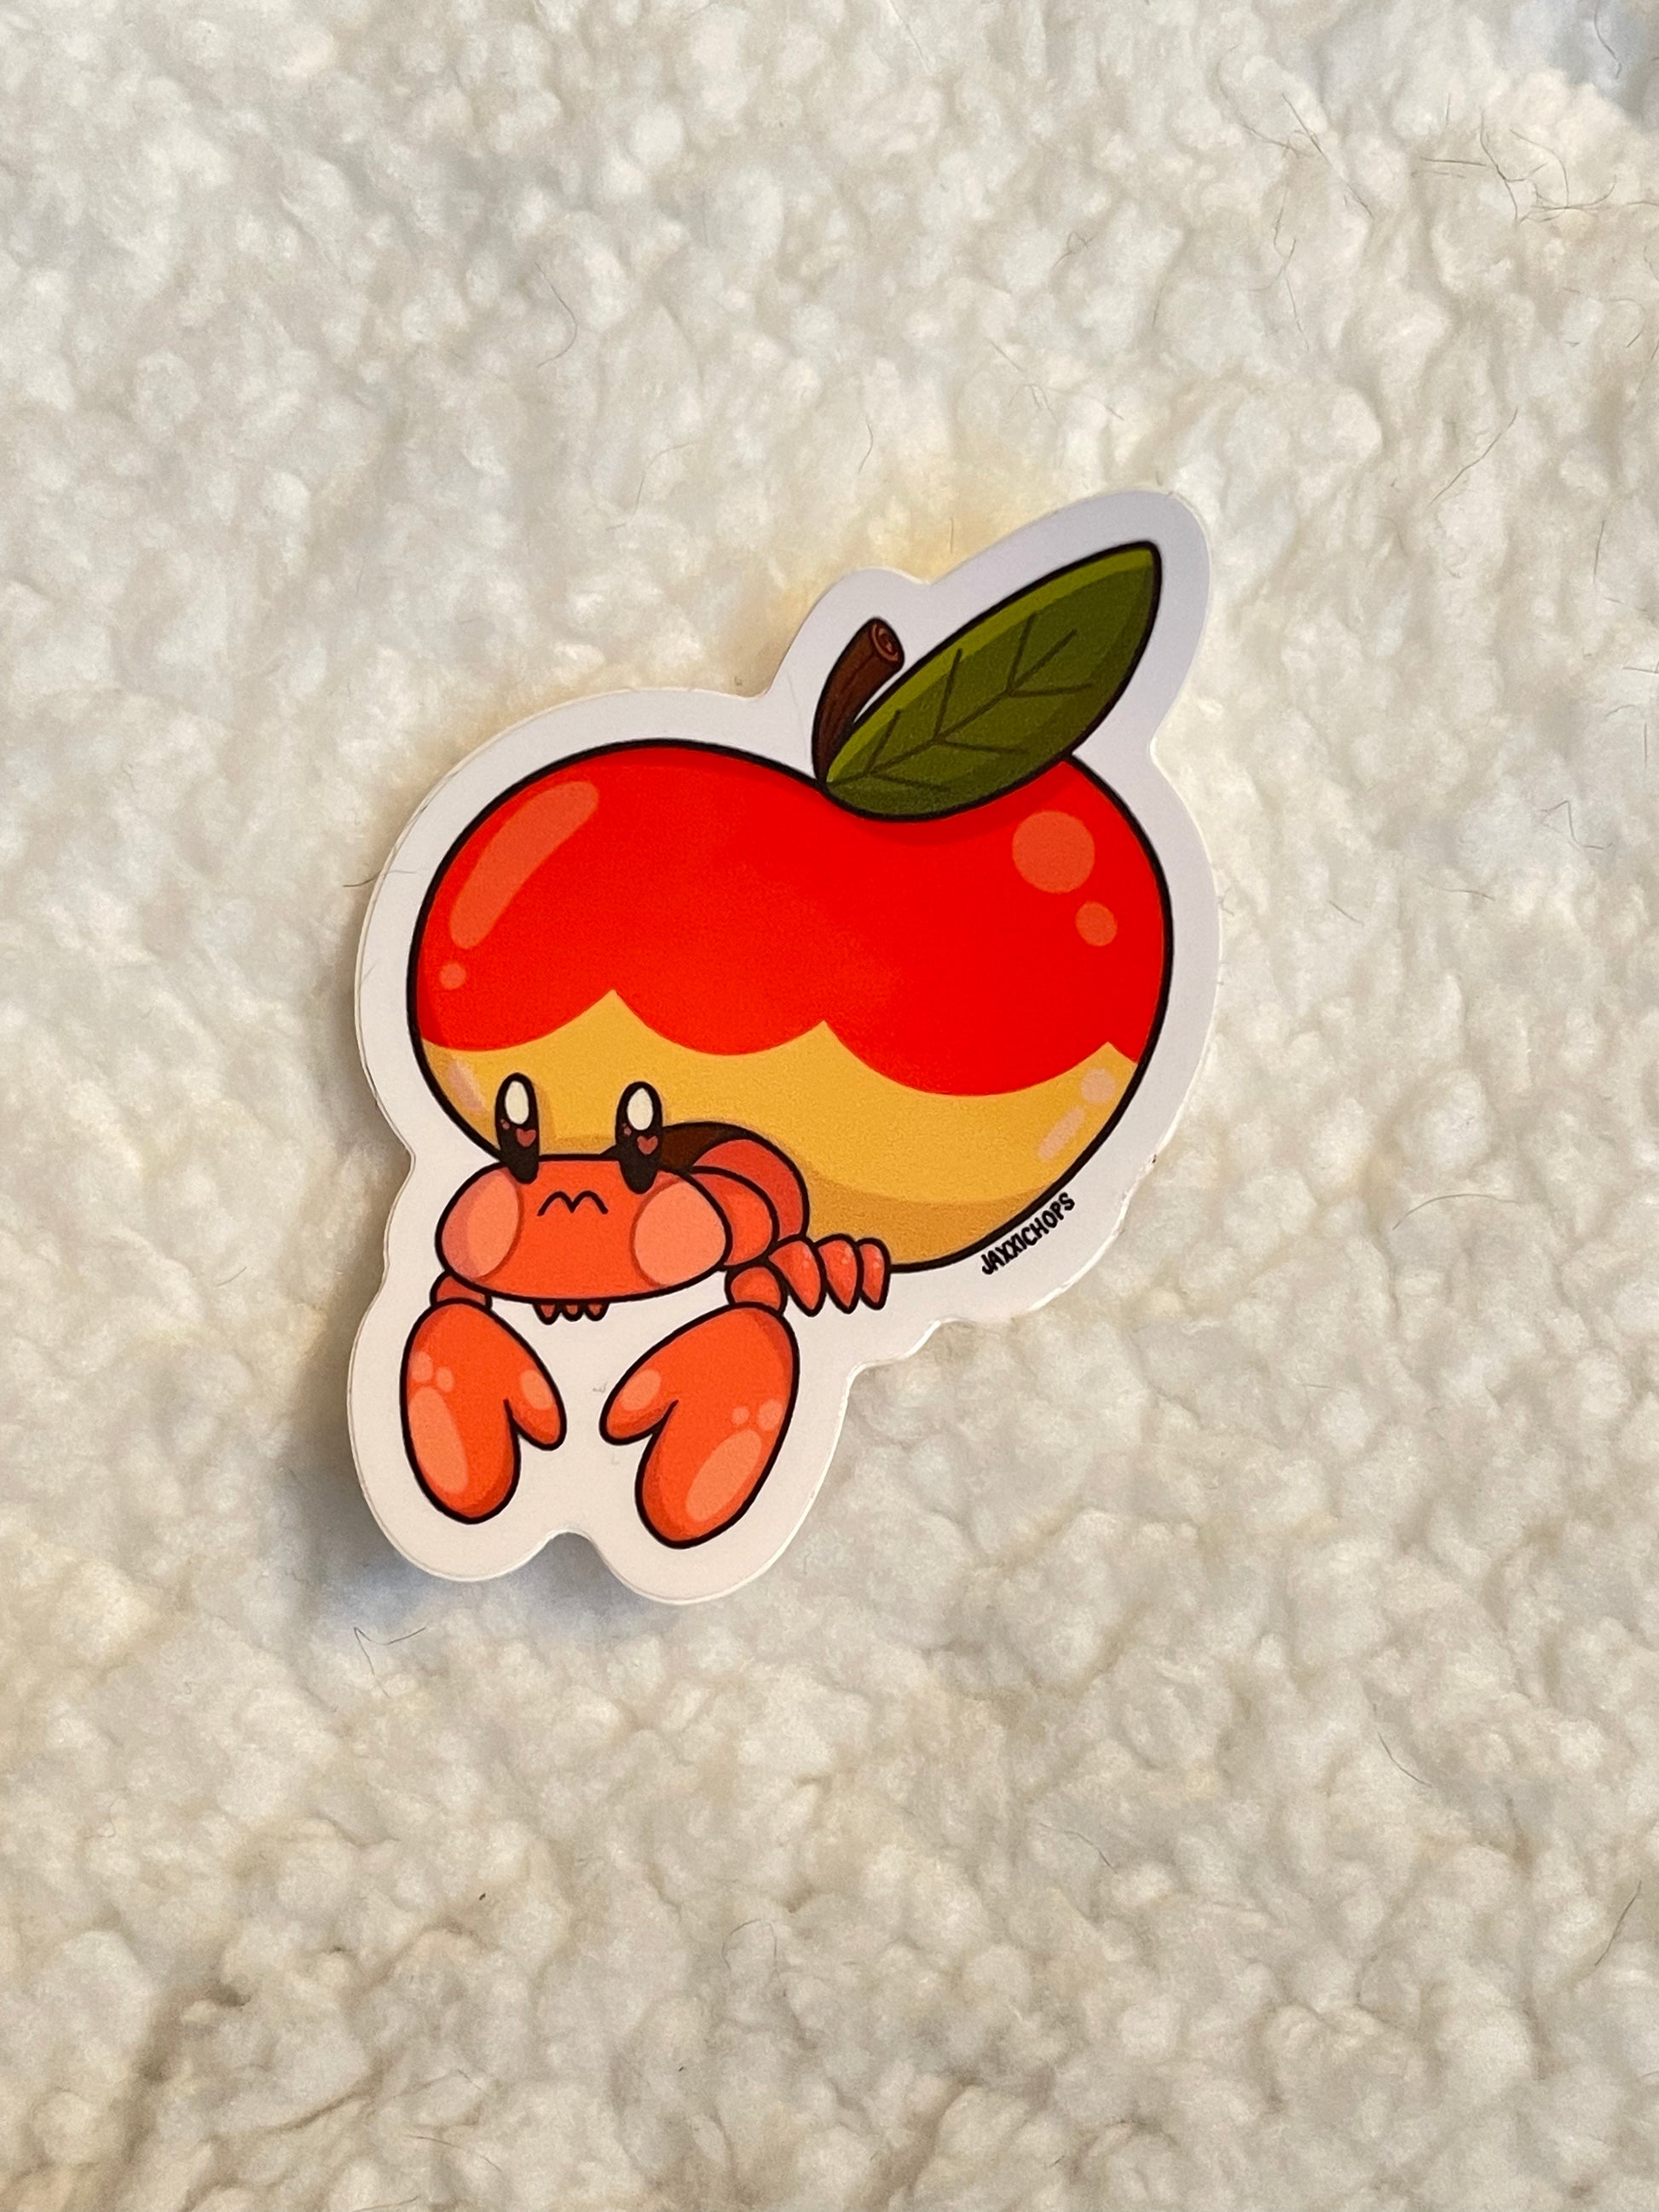 Sticker of a hermit crab inside of an apple, making a crab apple.